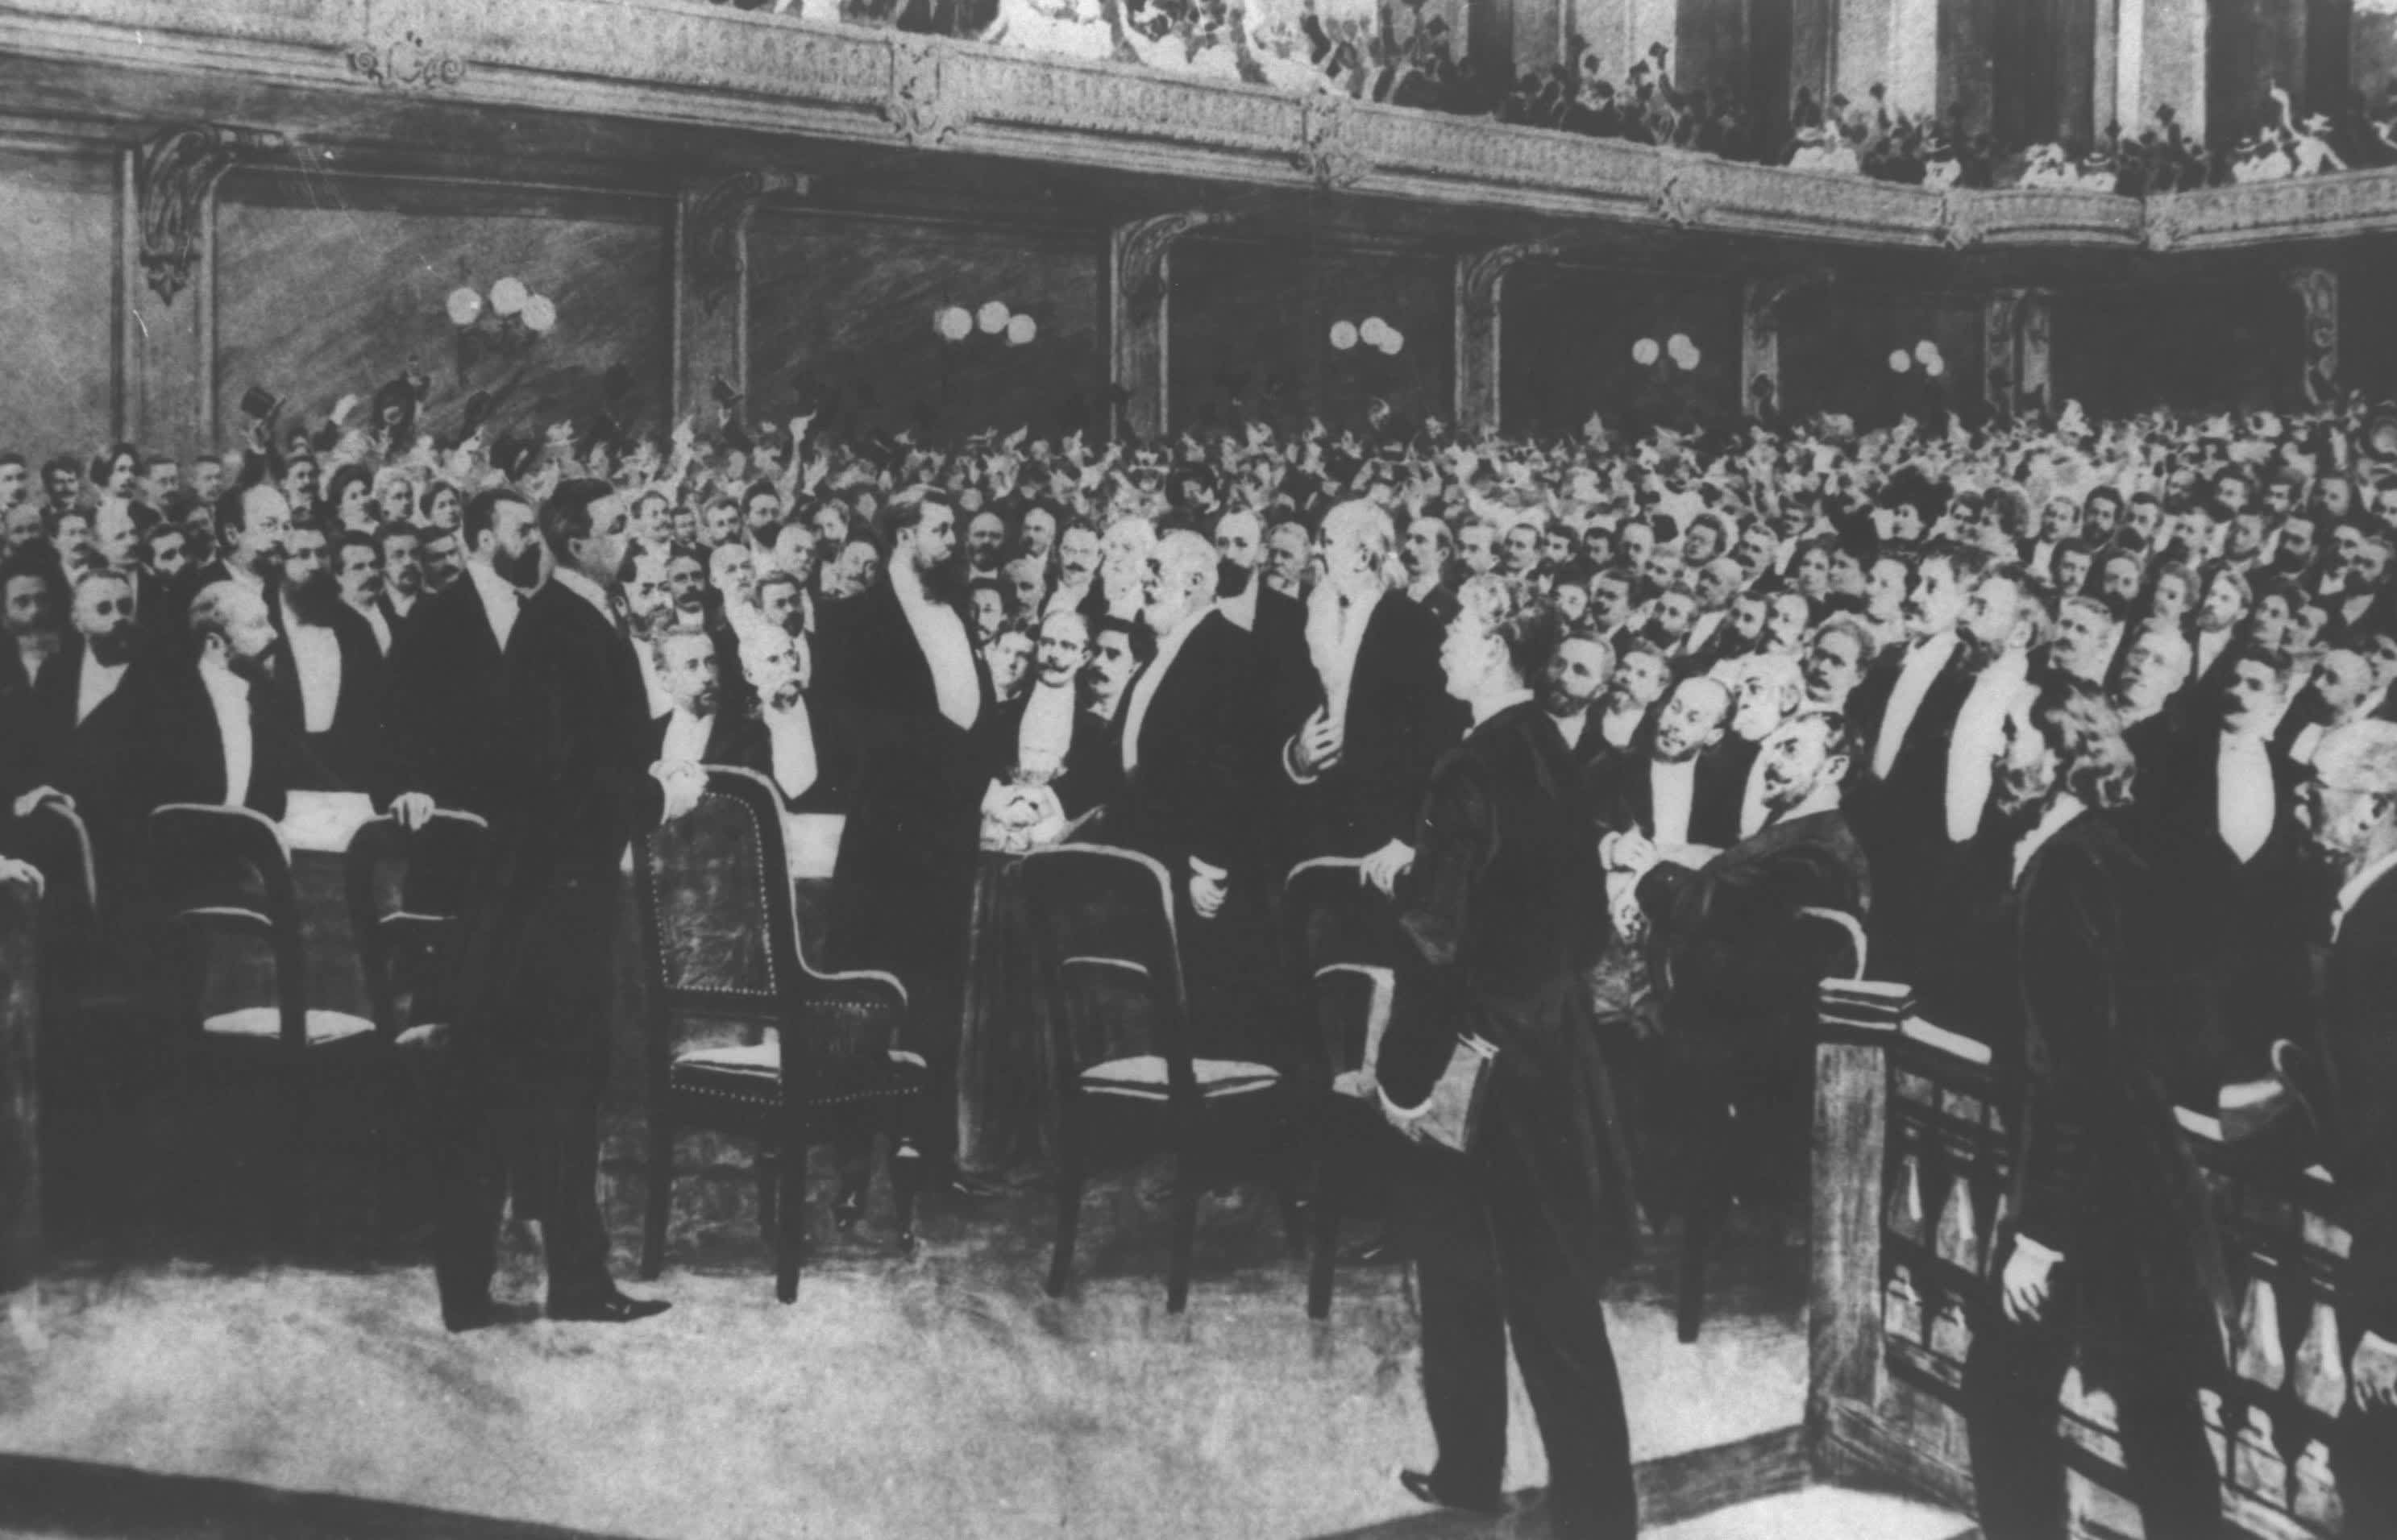 Theodor Herzl at the First Zionist Congress, August 25, 1897 (WIKIMEDIA COMMONS/ISRAEL NATIONAL PHOTO COLLECTION)